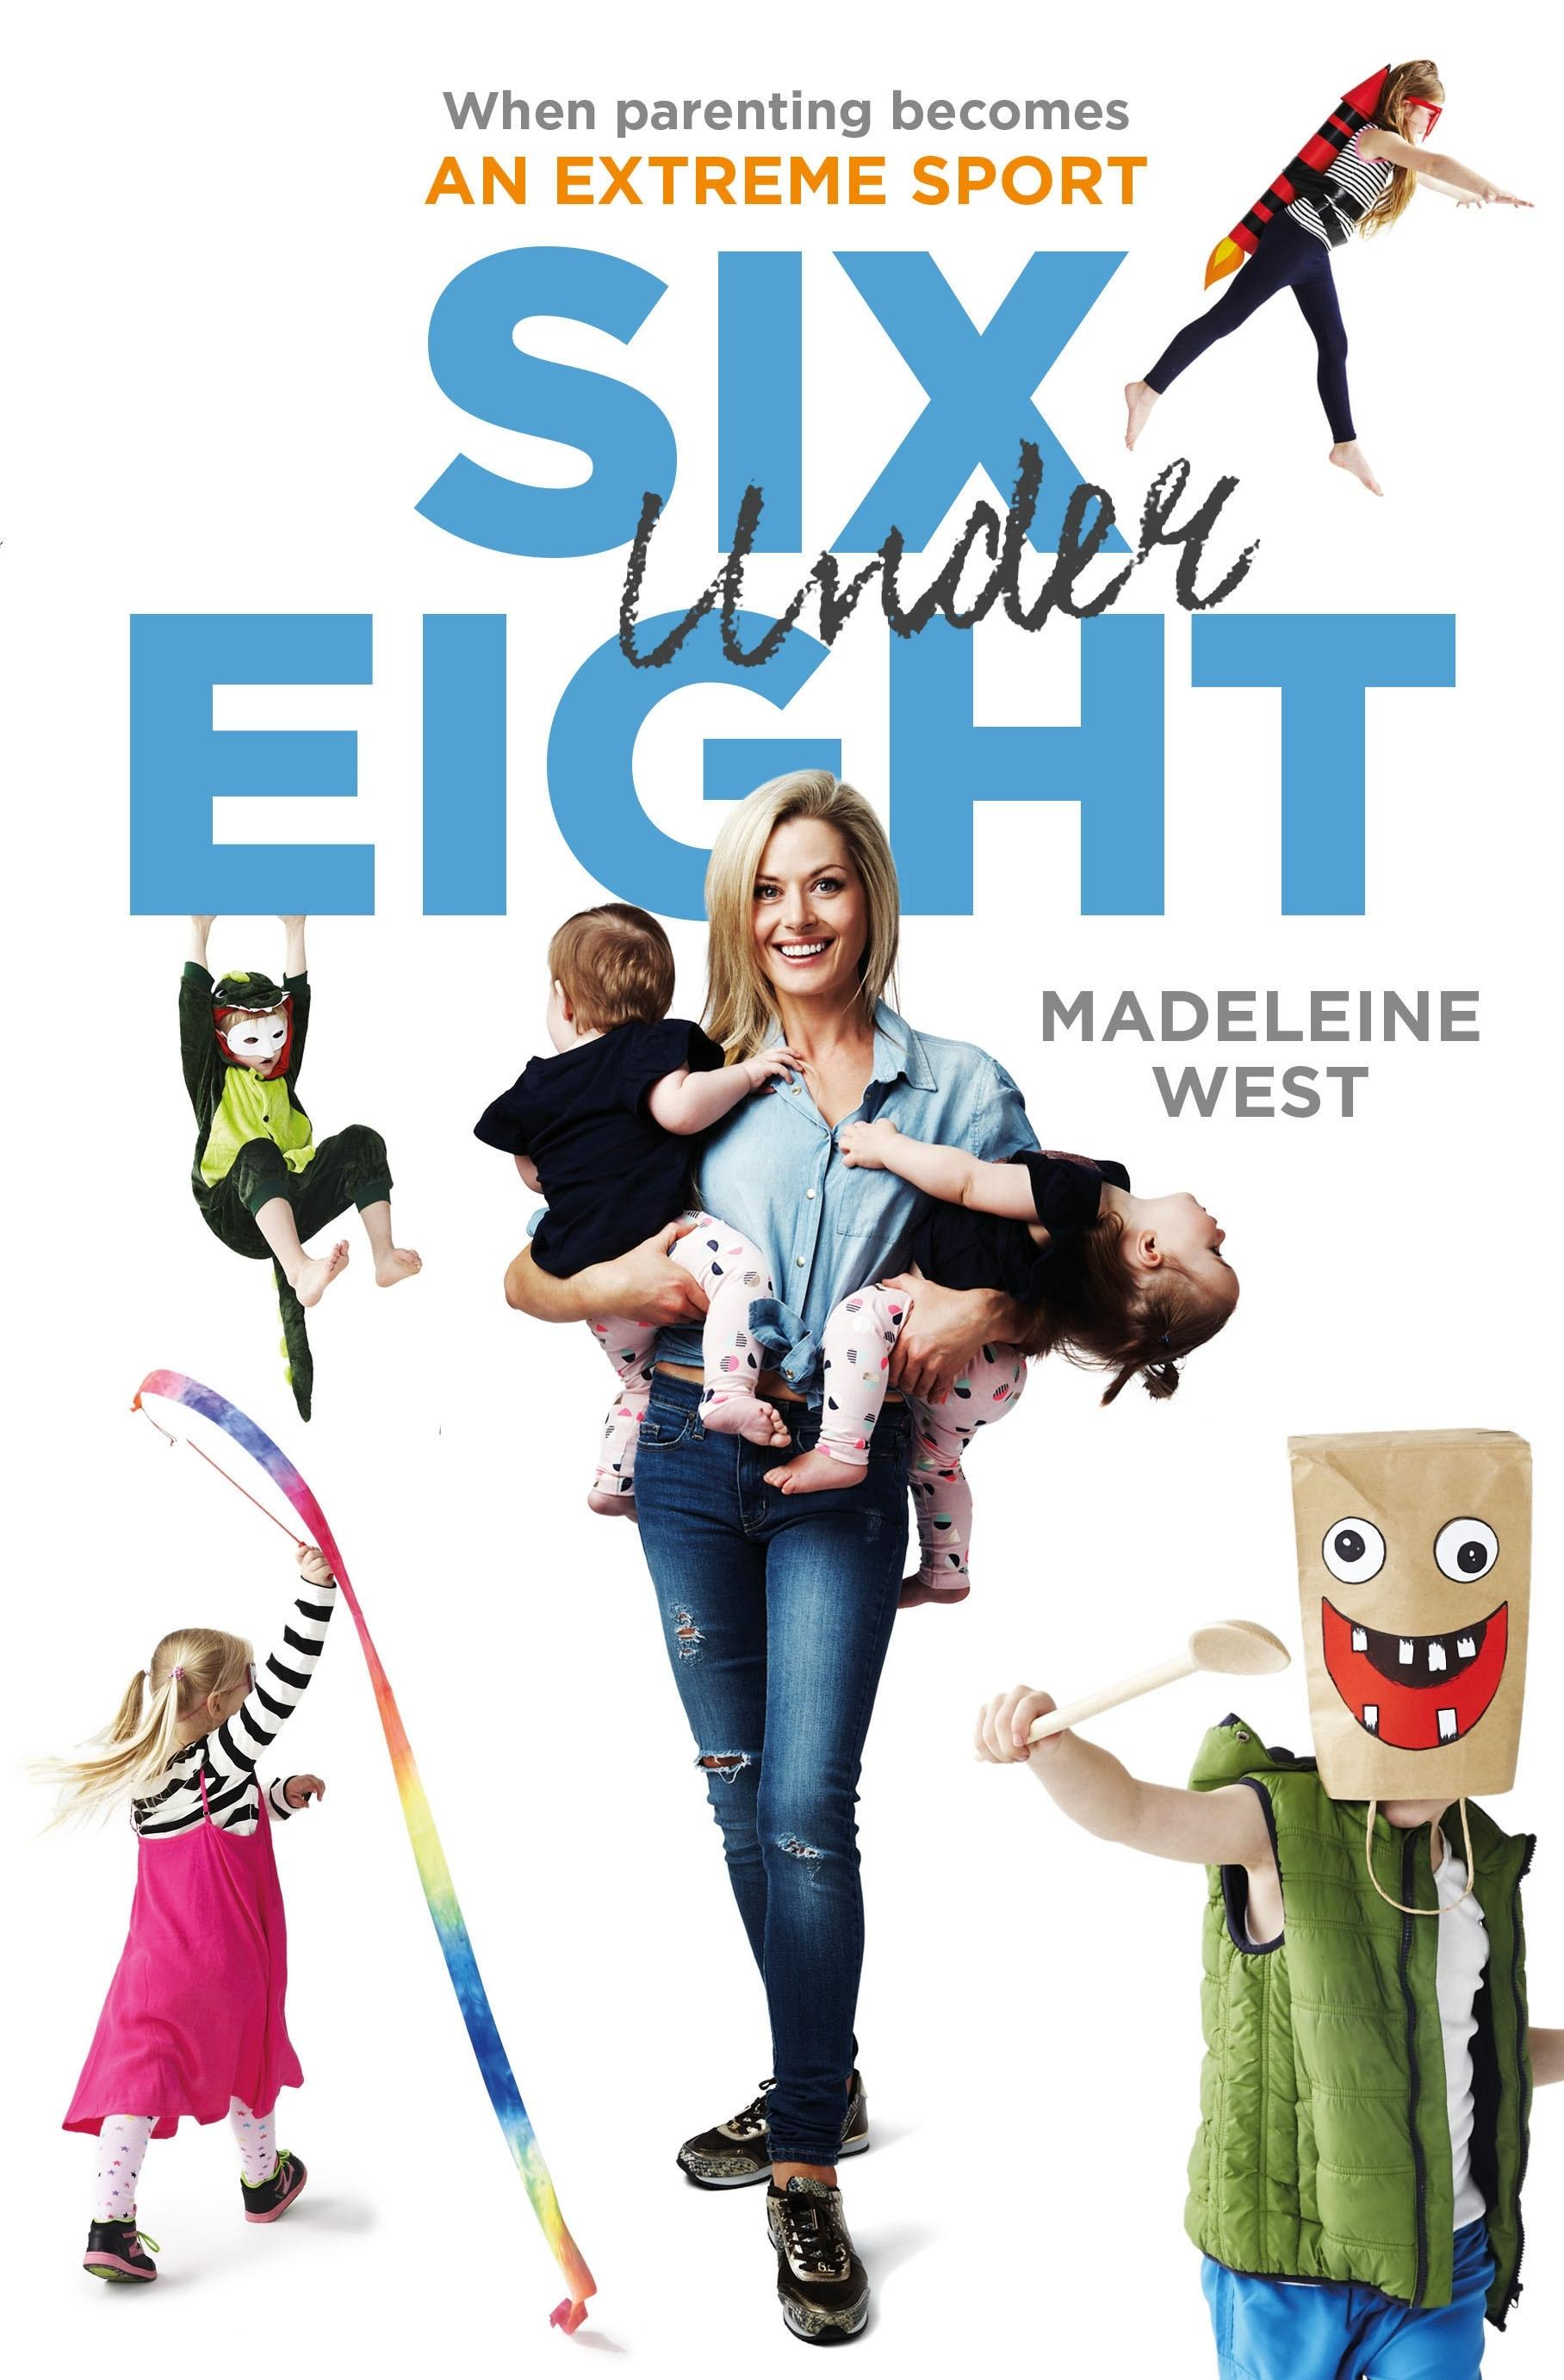 Madeleine West's tips for a busy life.